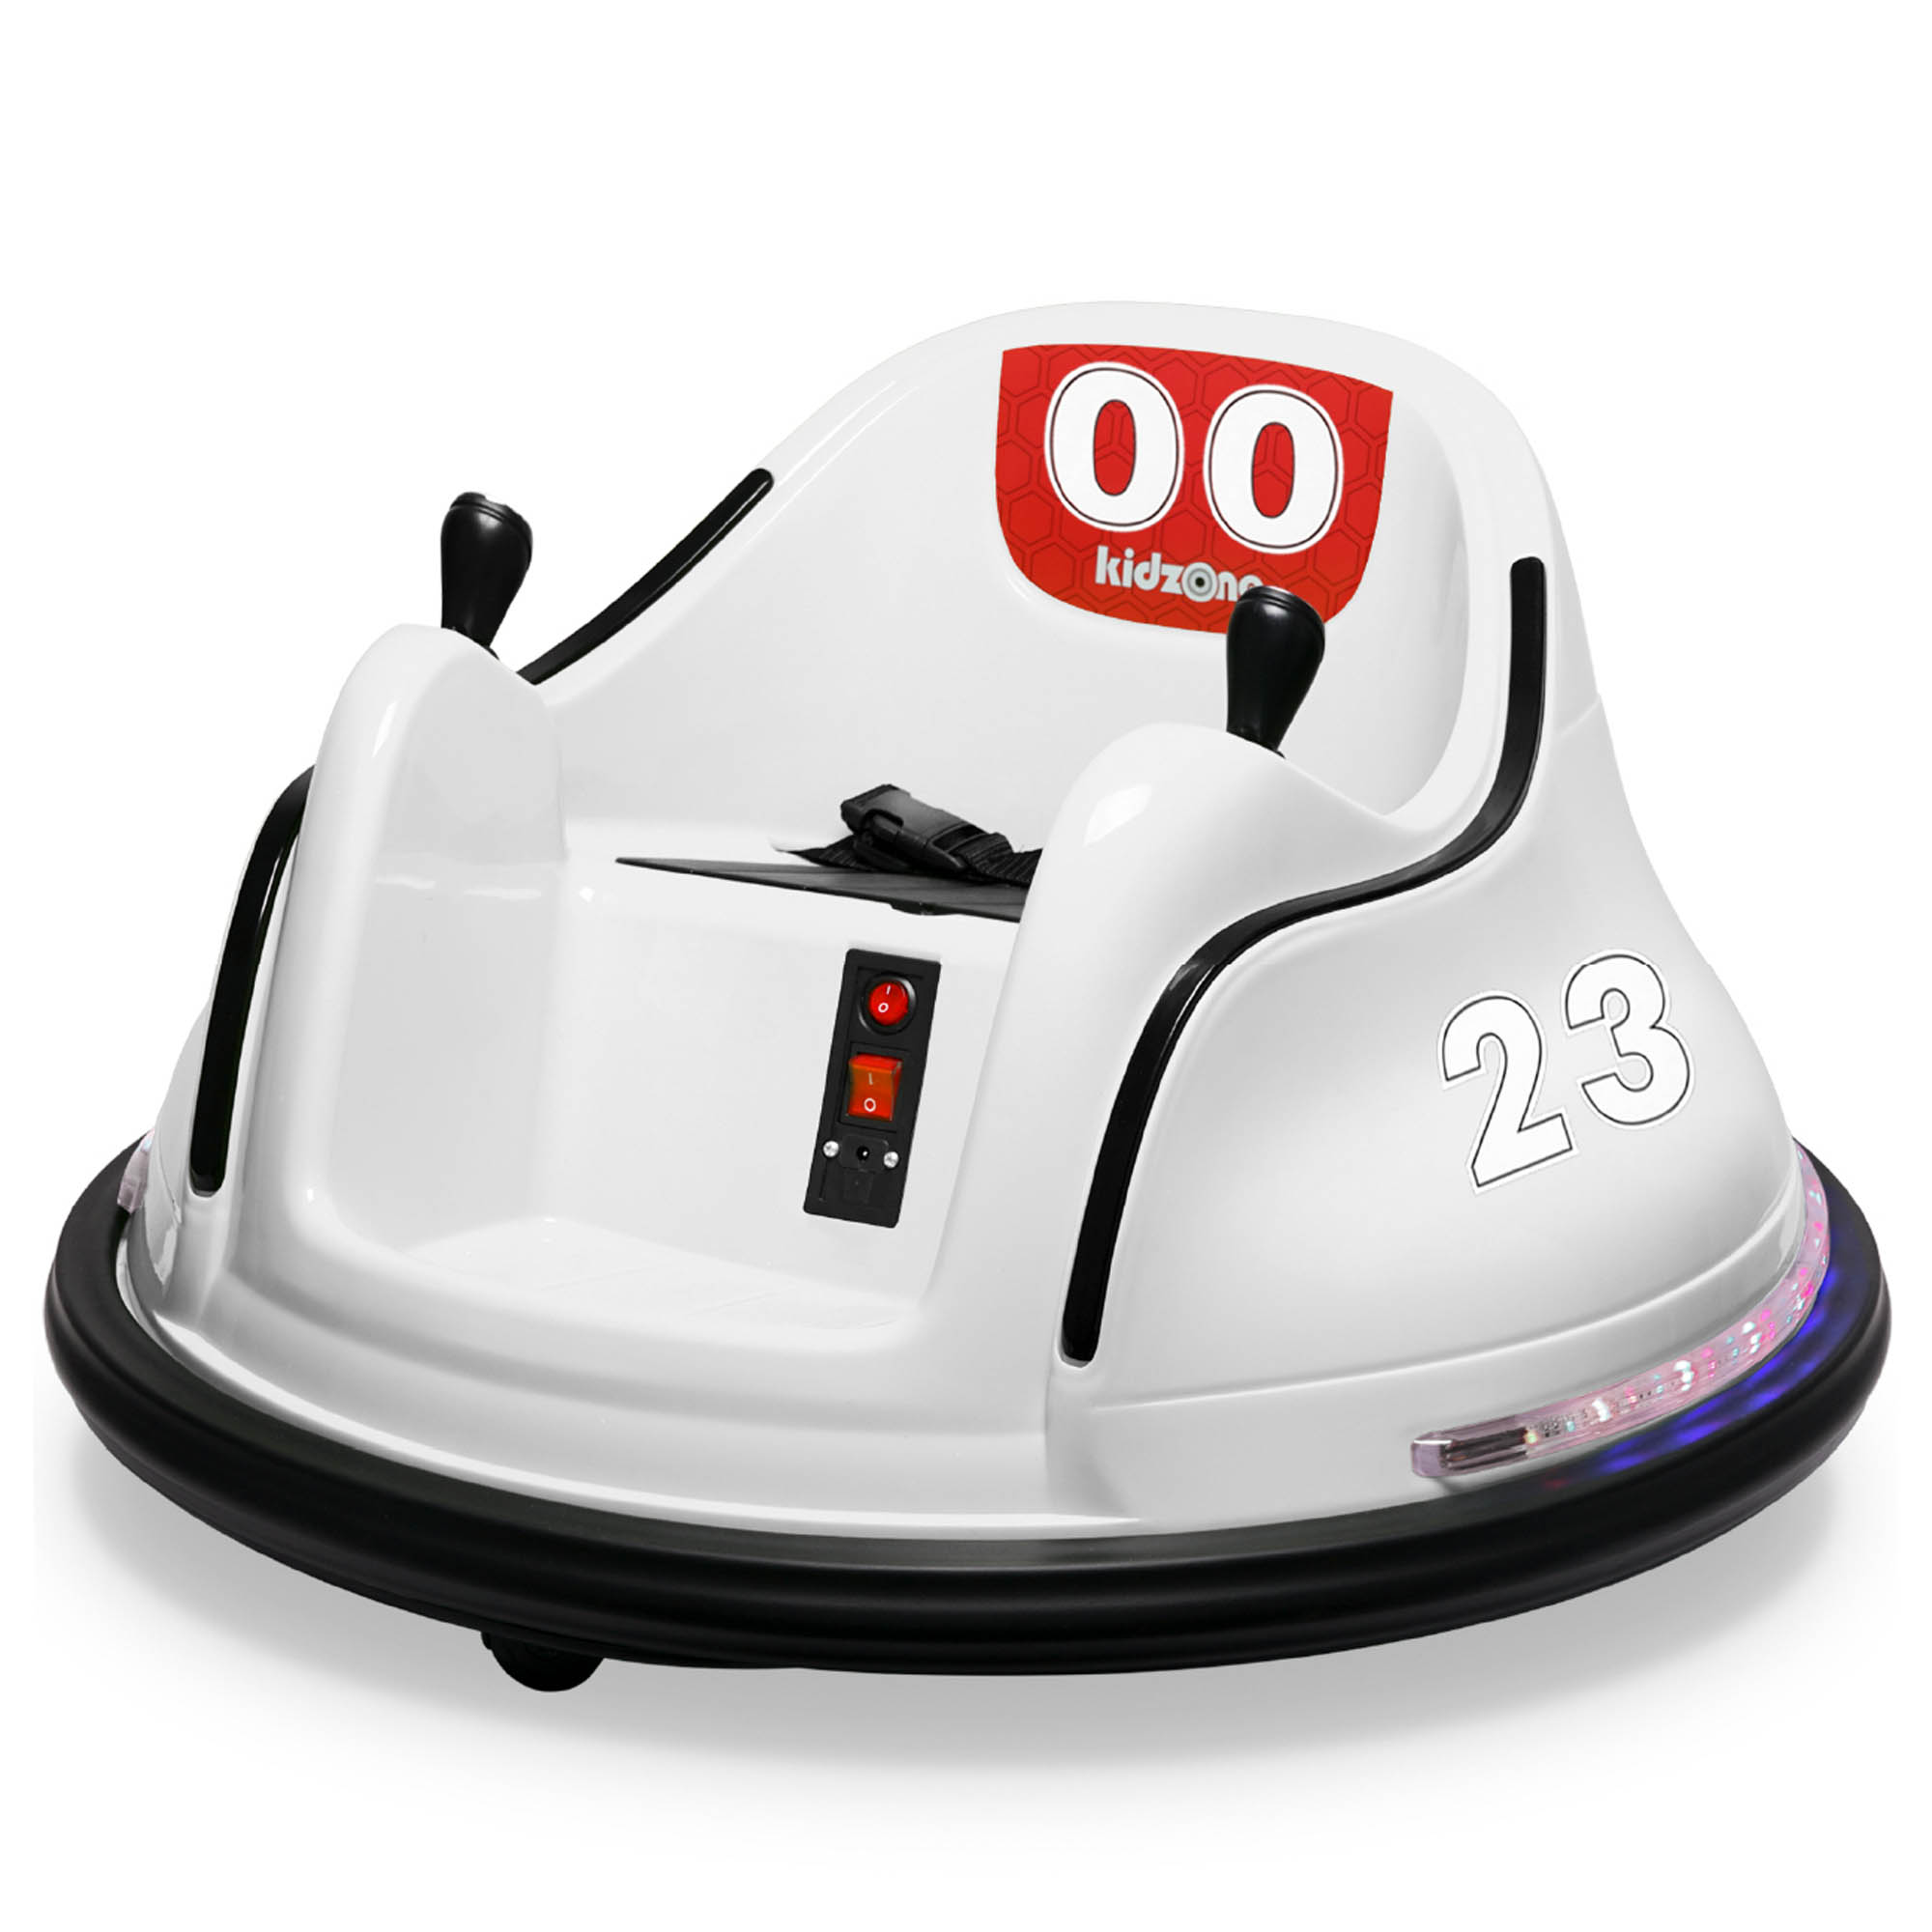 Kidzone DIY Race #00-99 6V Kids Toy Electric Ride On Bumper Car Vehicle Remote Control 360 Spin ASTM-certified, White - image 1 of 6